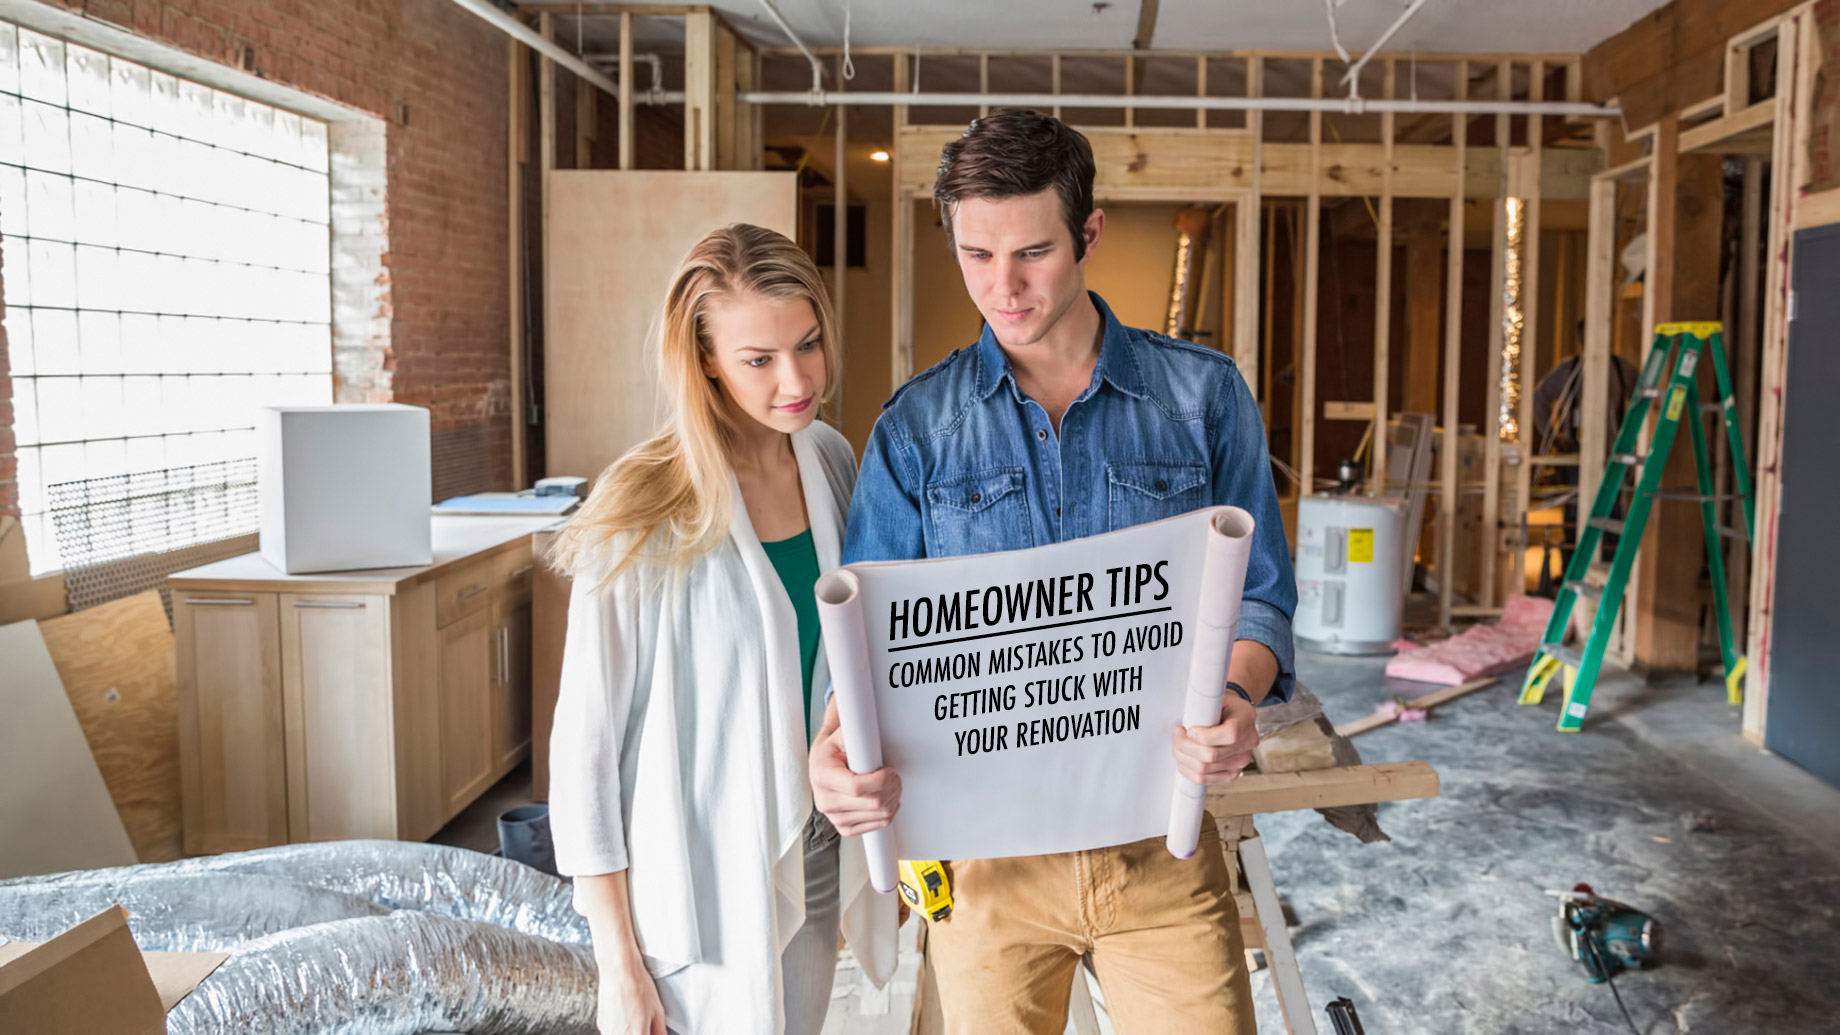 Homeowner Tips - Common Mistakes to Avoid Getting Stuck With Your Renovation